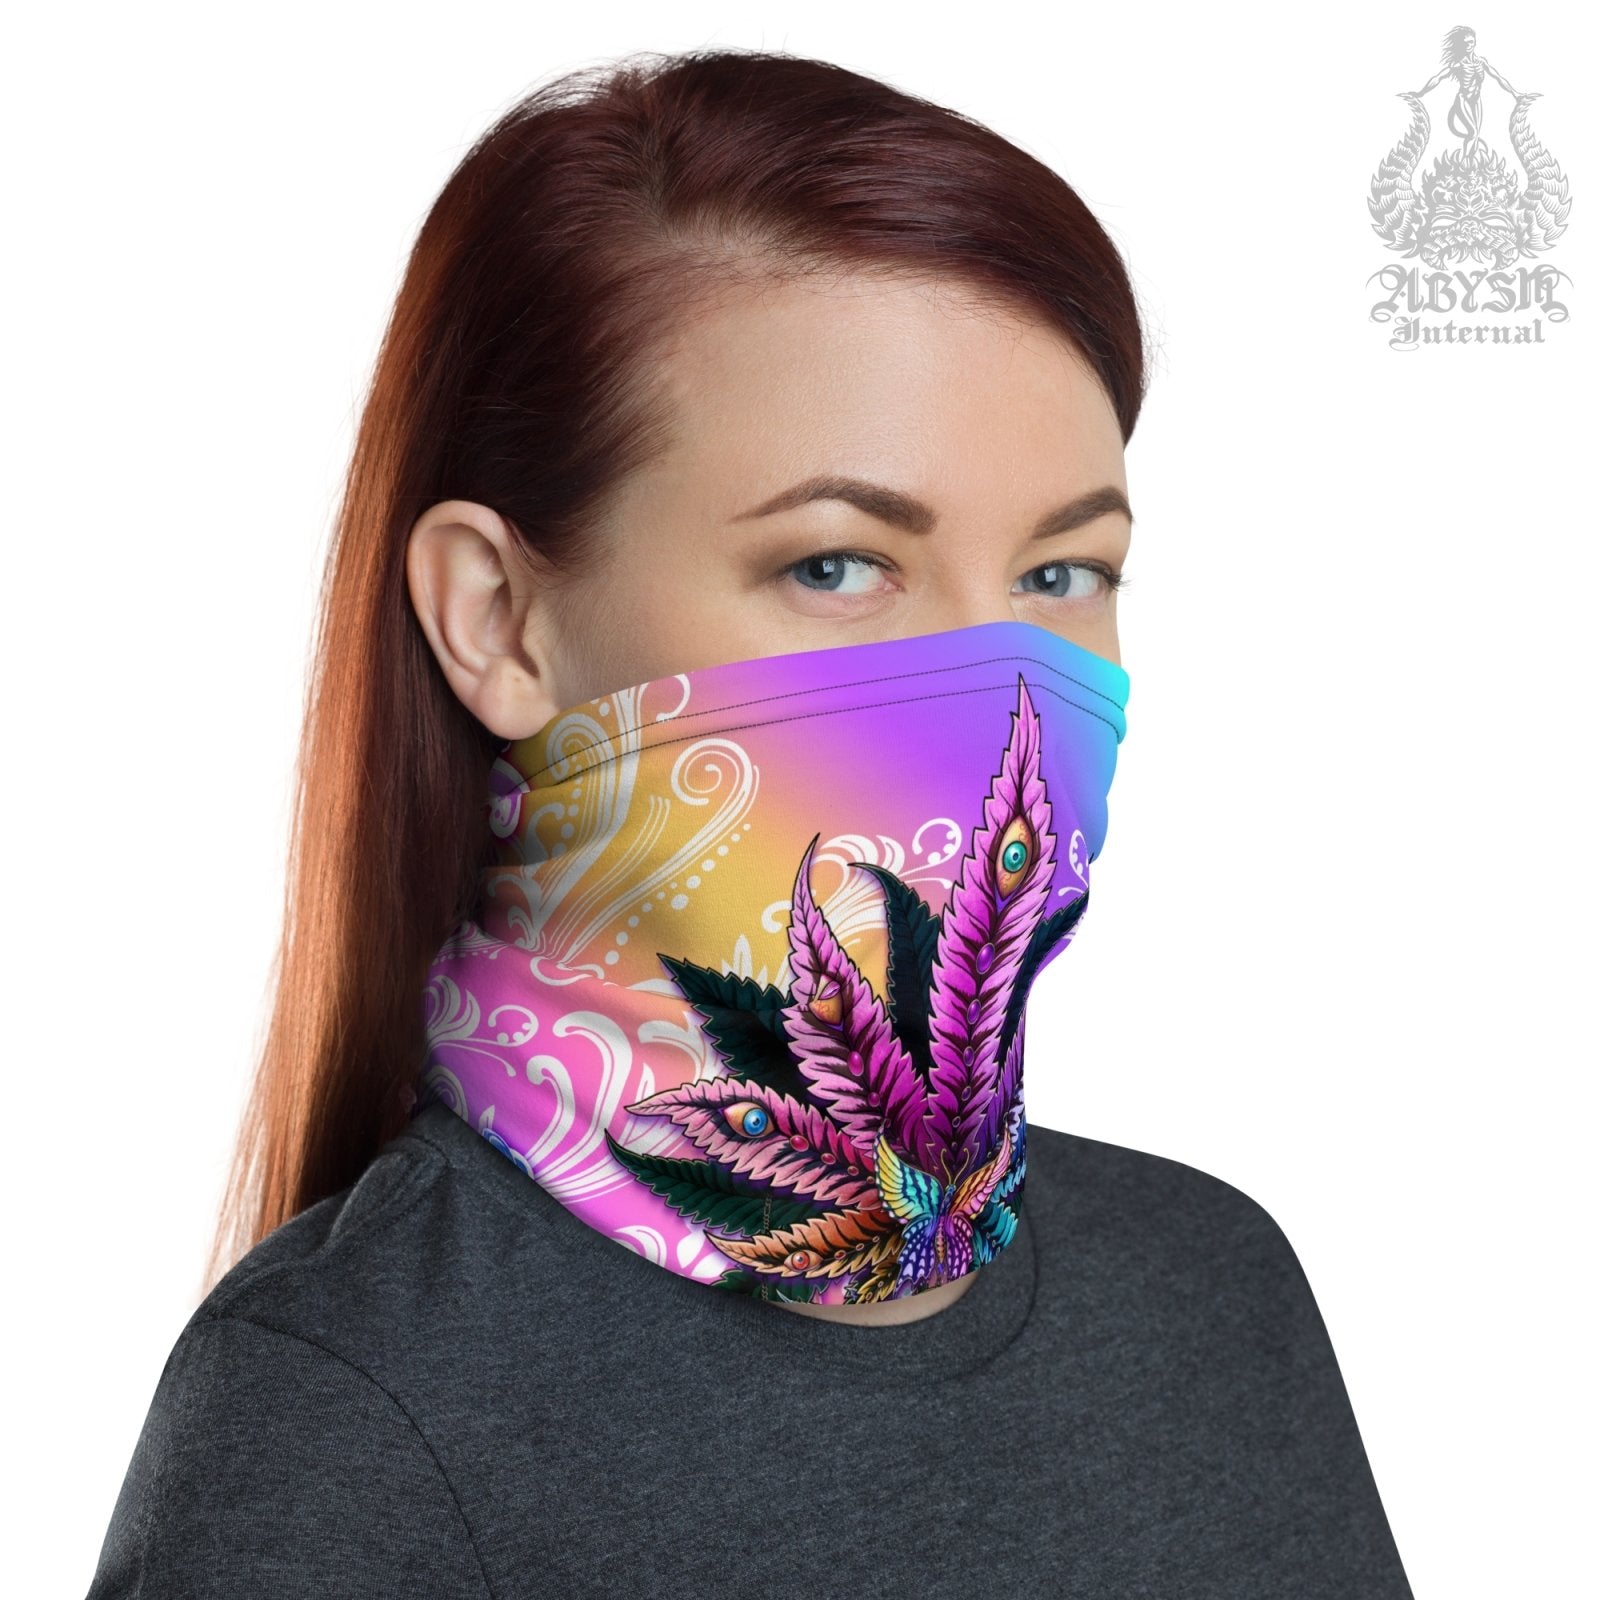 Cannabis Neck Gaiter, Weed Face Mask, Colorful Marijuana Head Covering, Psychedelic Festival Outfit, 420 Gift - Black - Abysm Internal